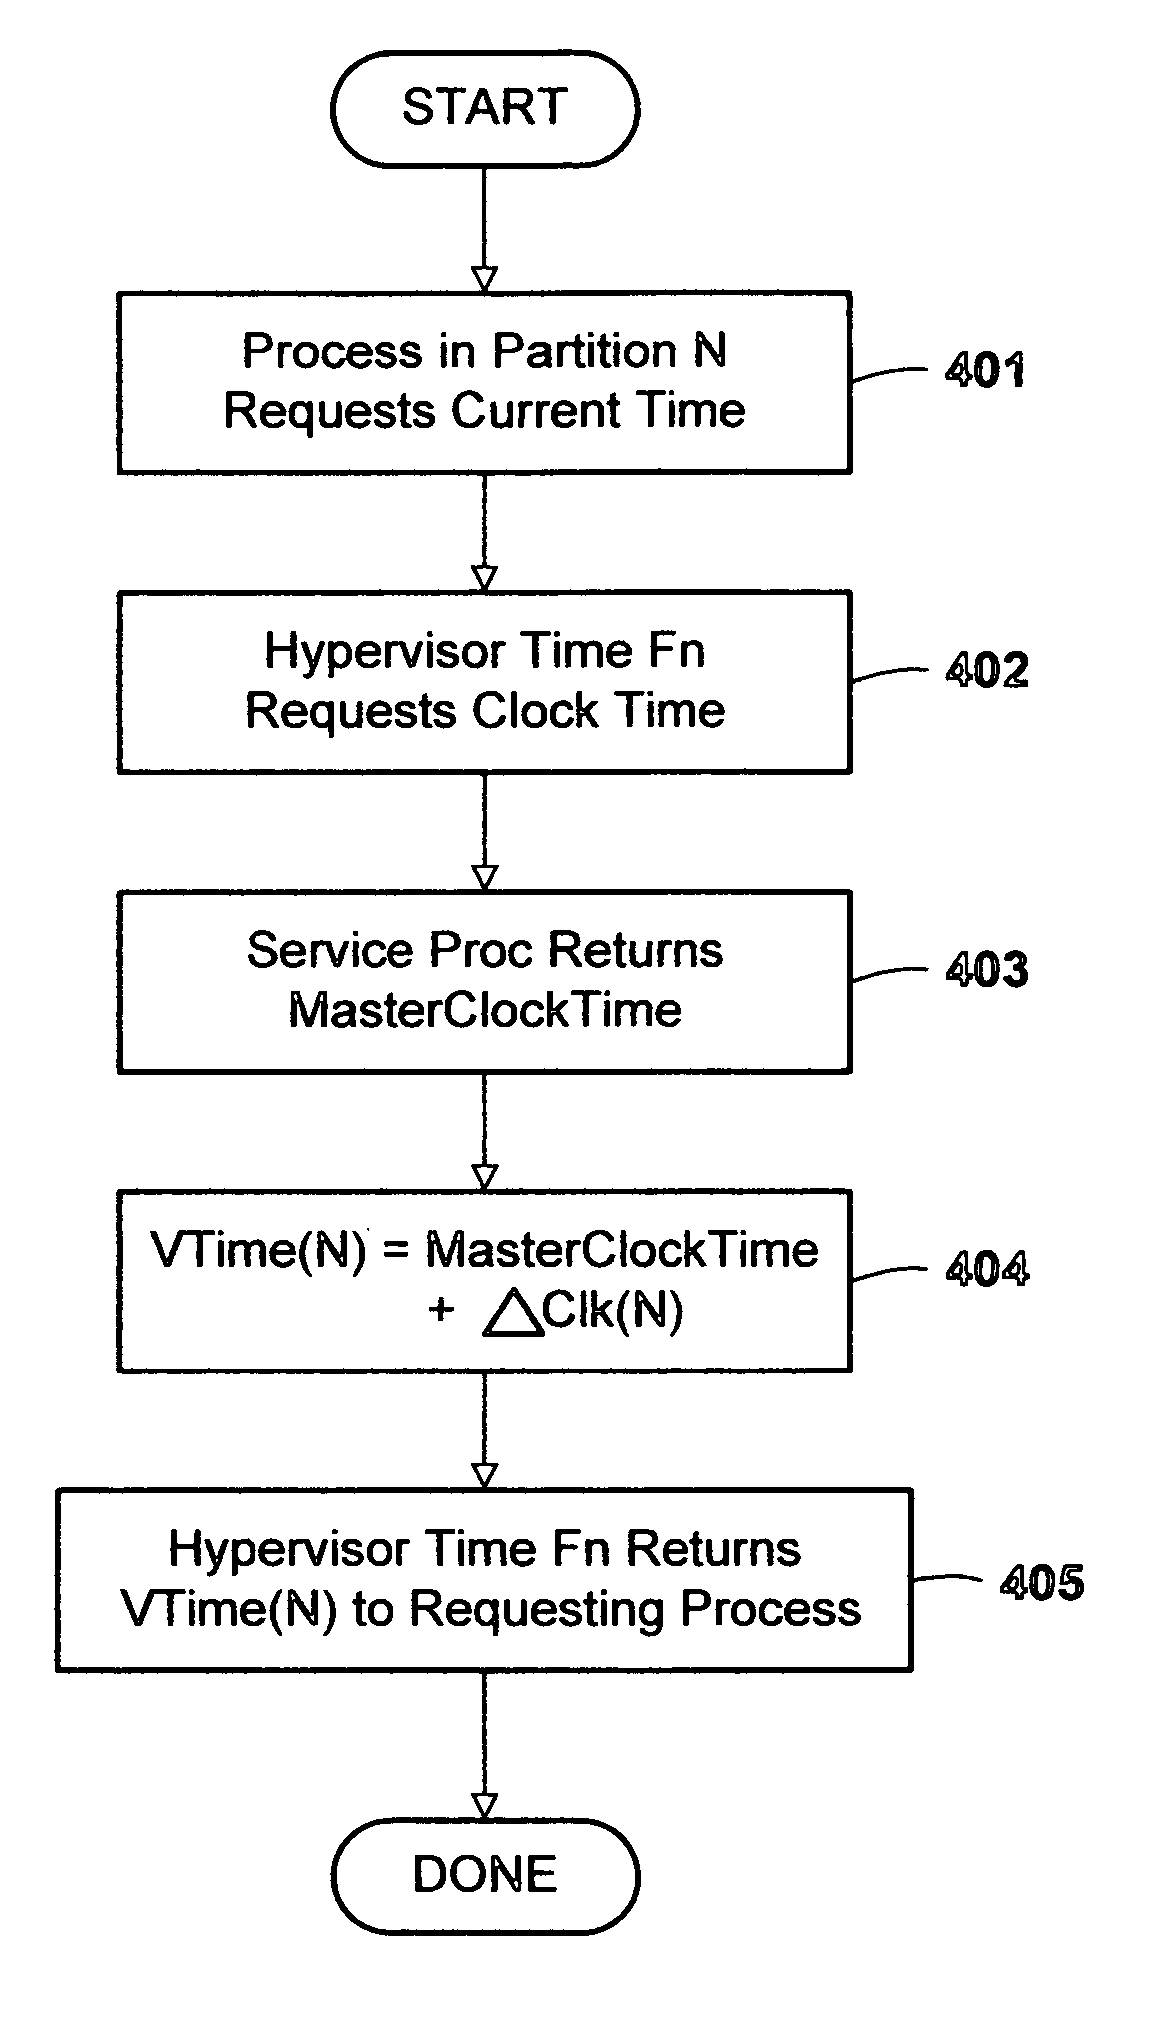 Method and apparatus for maintaining cached state data for one or more shared devices in a logically partitioned computer system